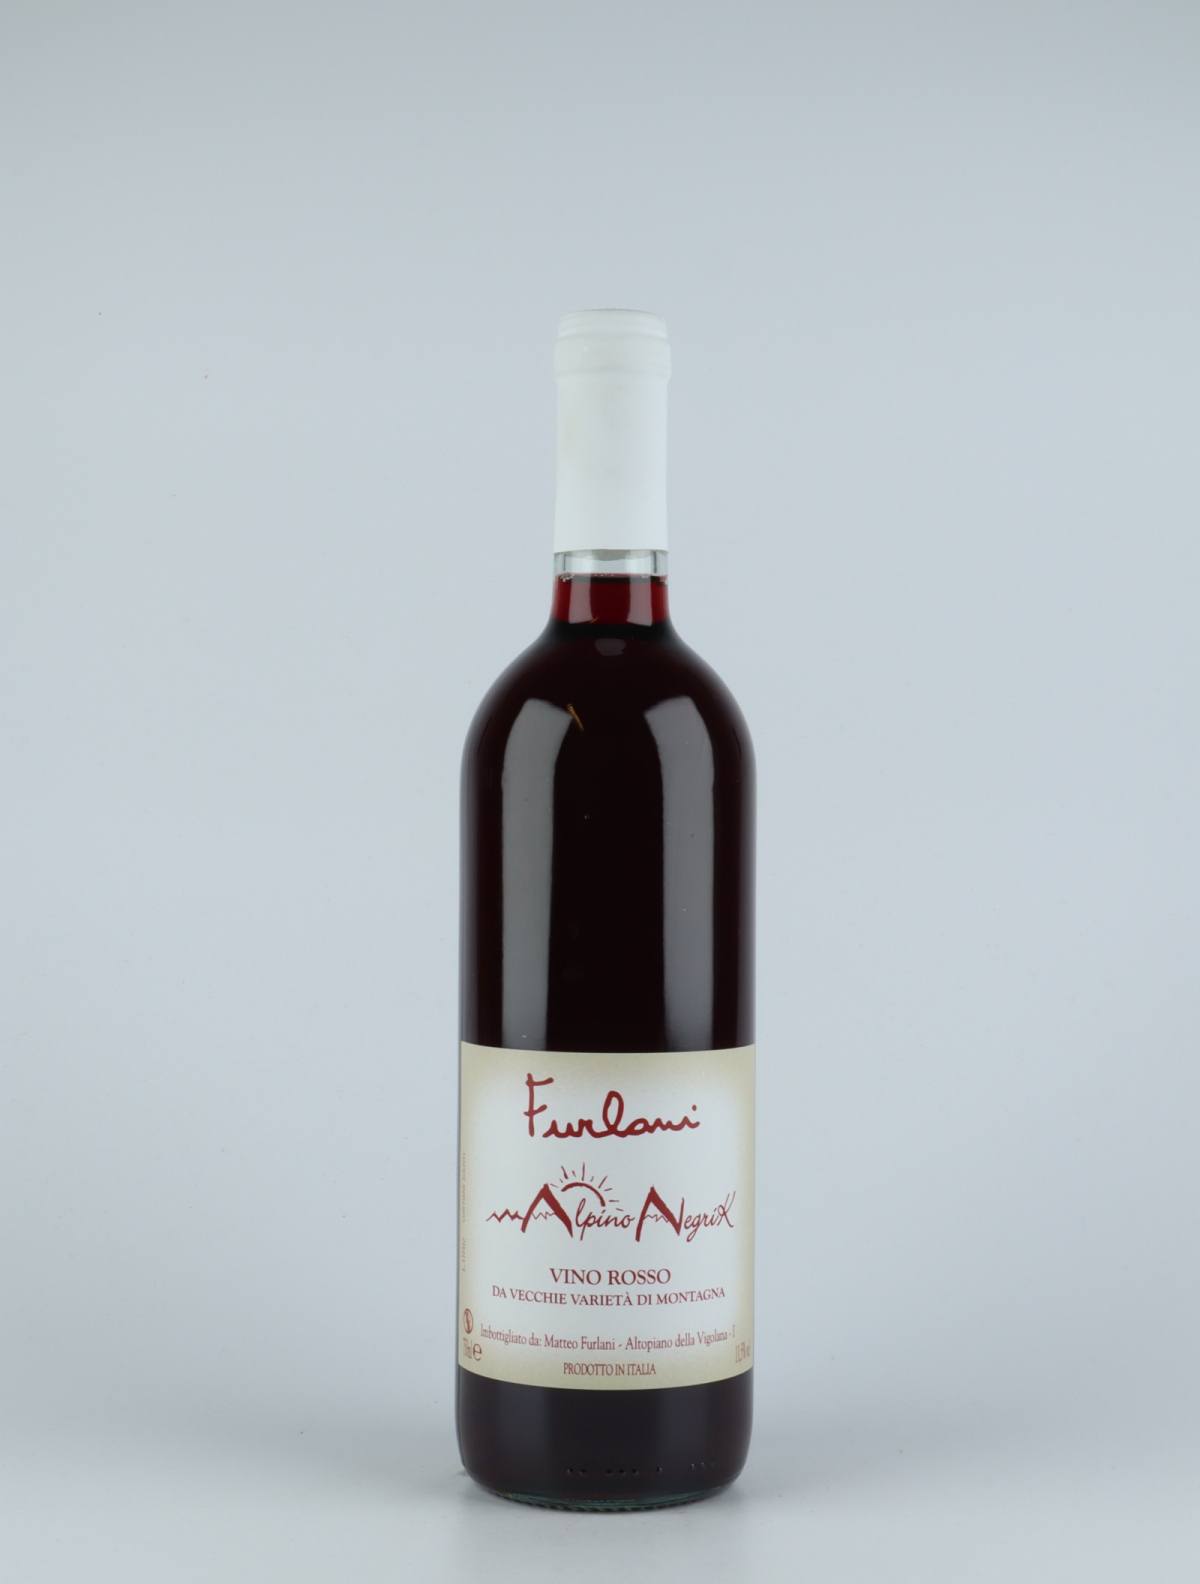 A bottle 2018 Rosso Alpino Negrik Red wine from Cantina Furlani, Alto Adige in Italy